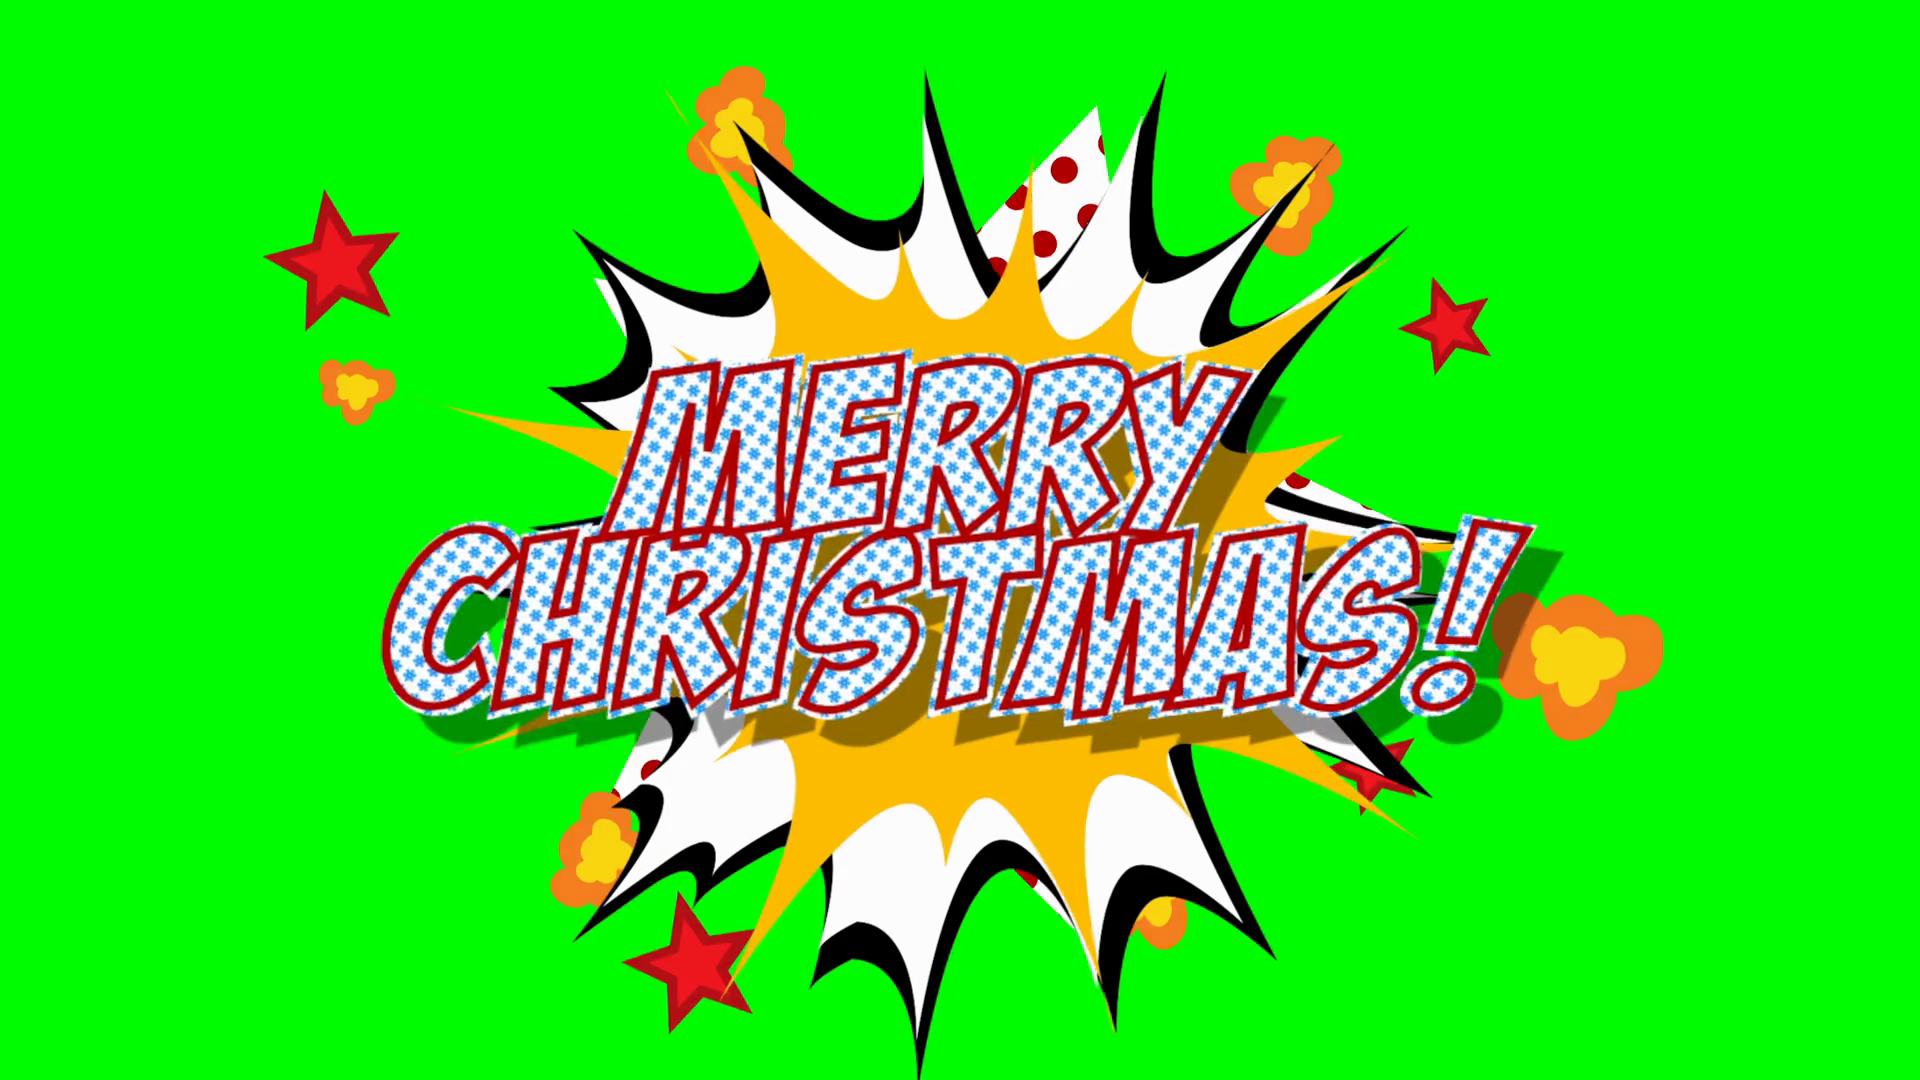 merry christmas video greeting card in comic style, Merry Christmas! text with red halftone pattern background appears and disappears on green screen Motion Background